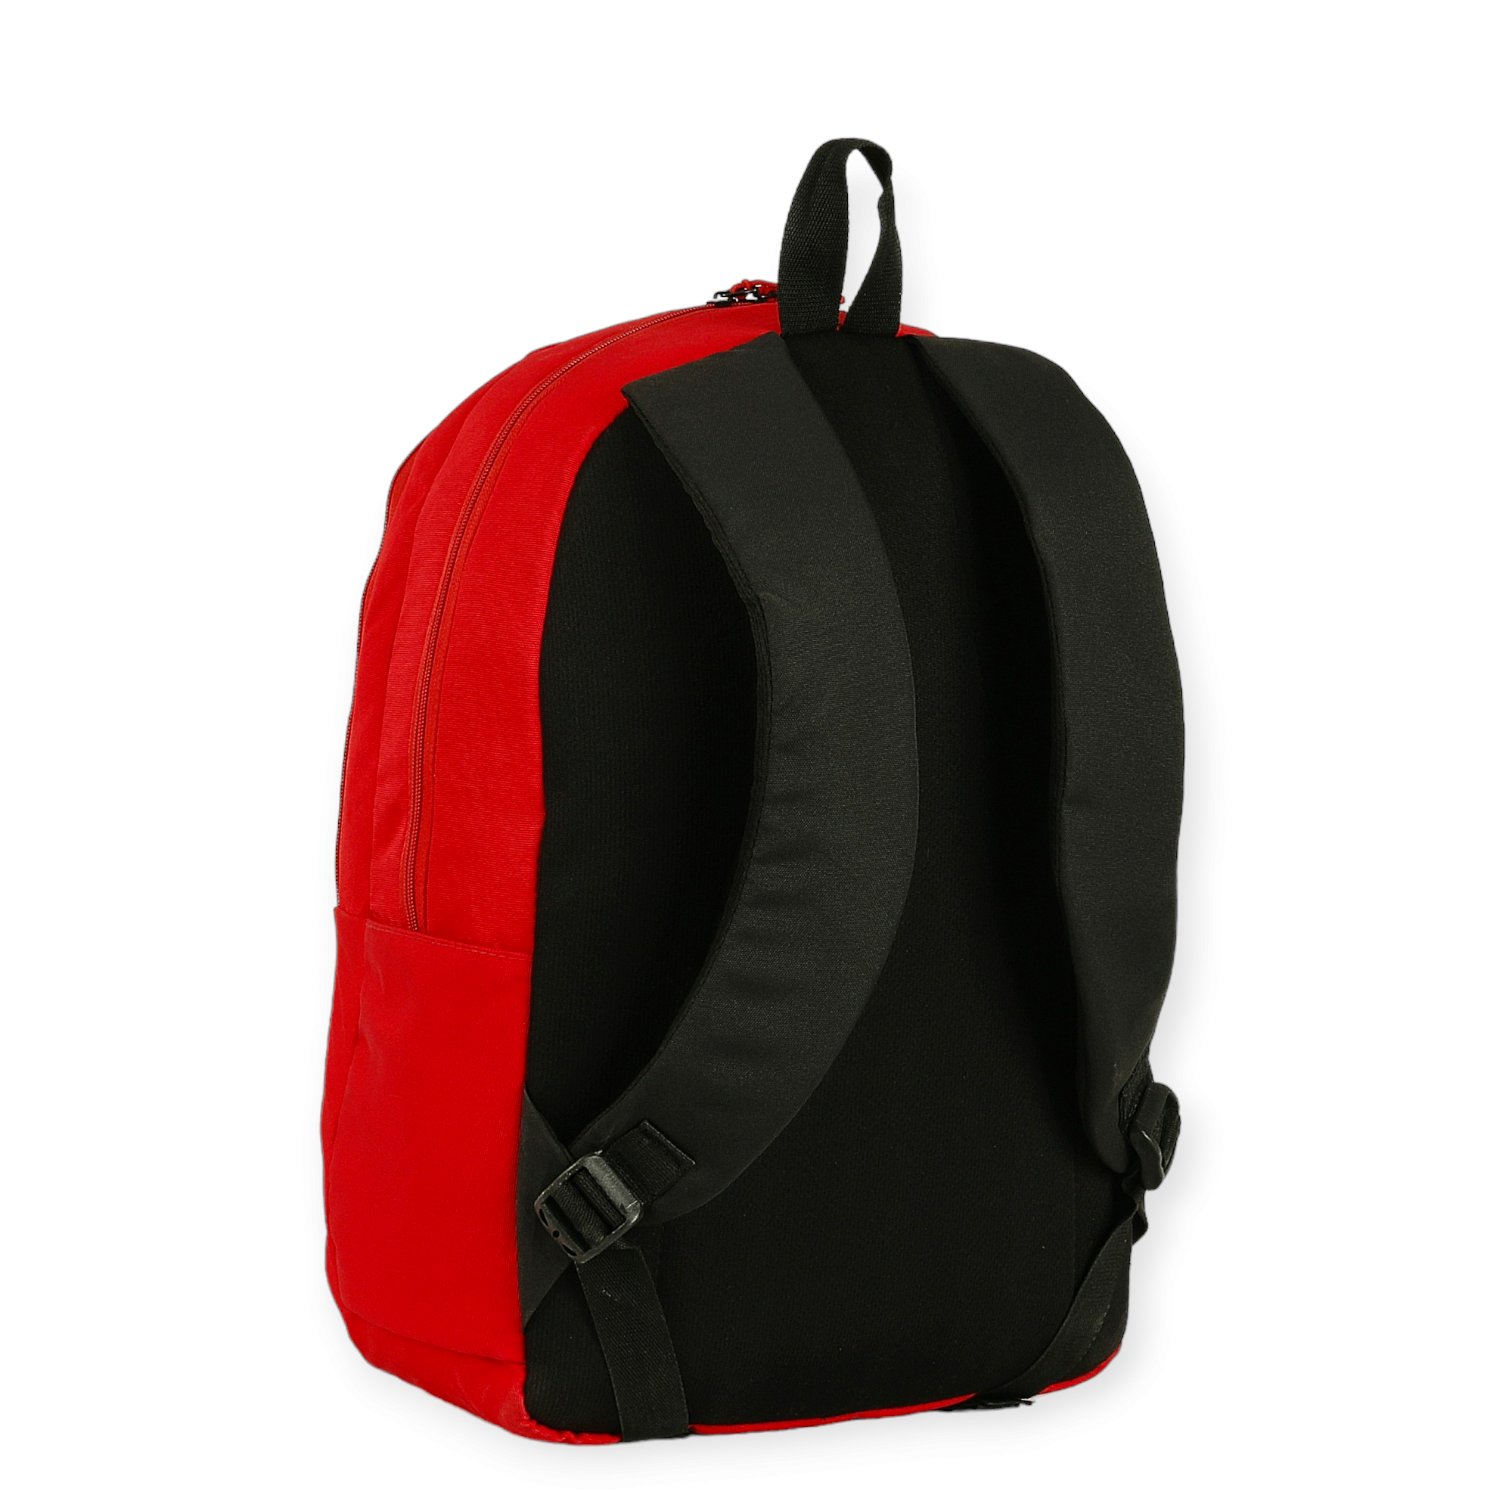 Force Basic Backpack Red FDB-20-20